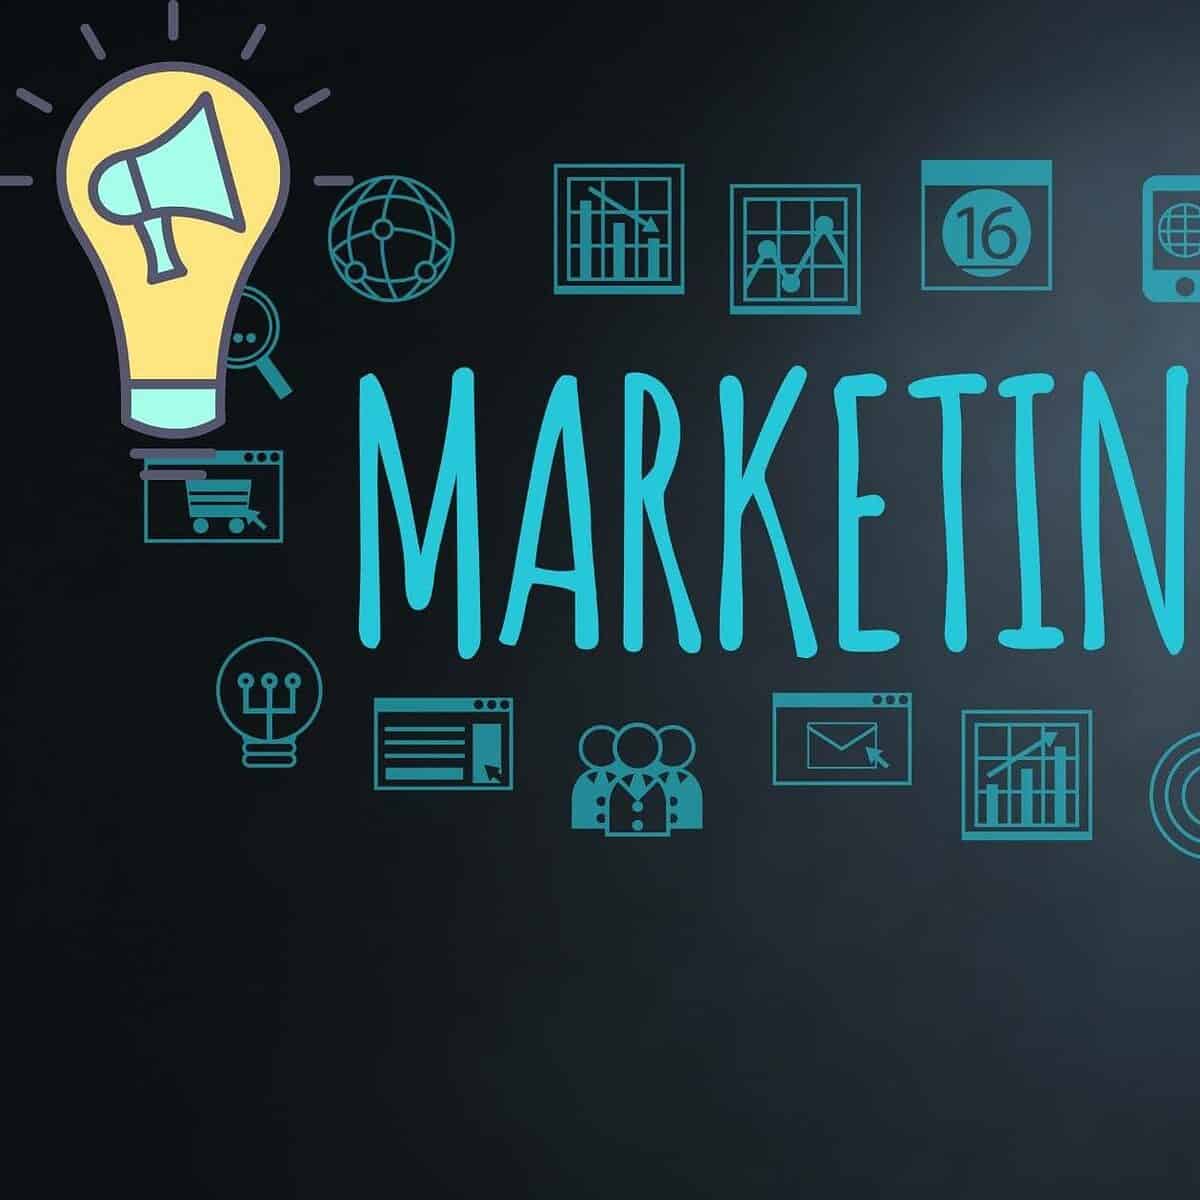 You are currently viewing 31 Marketing Ideas For Small Business In 2022